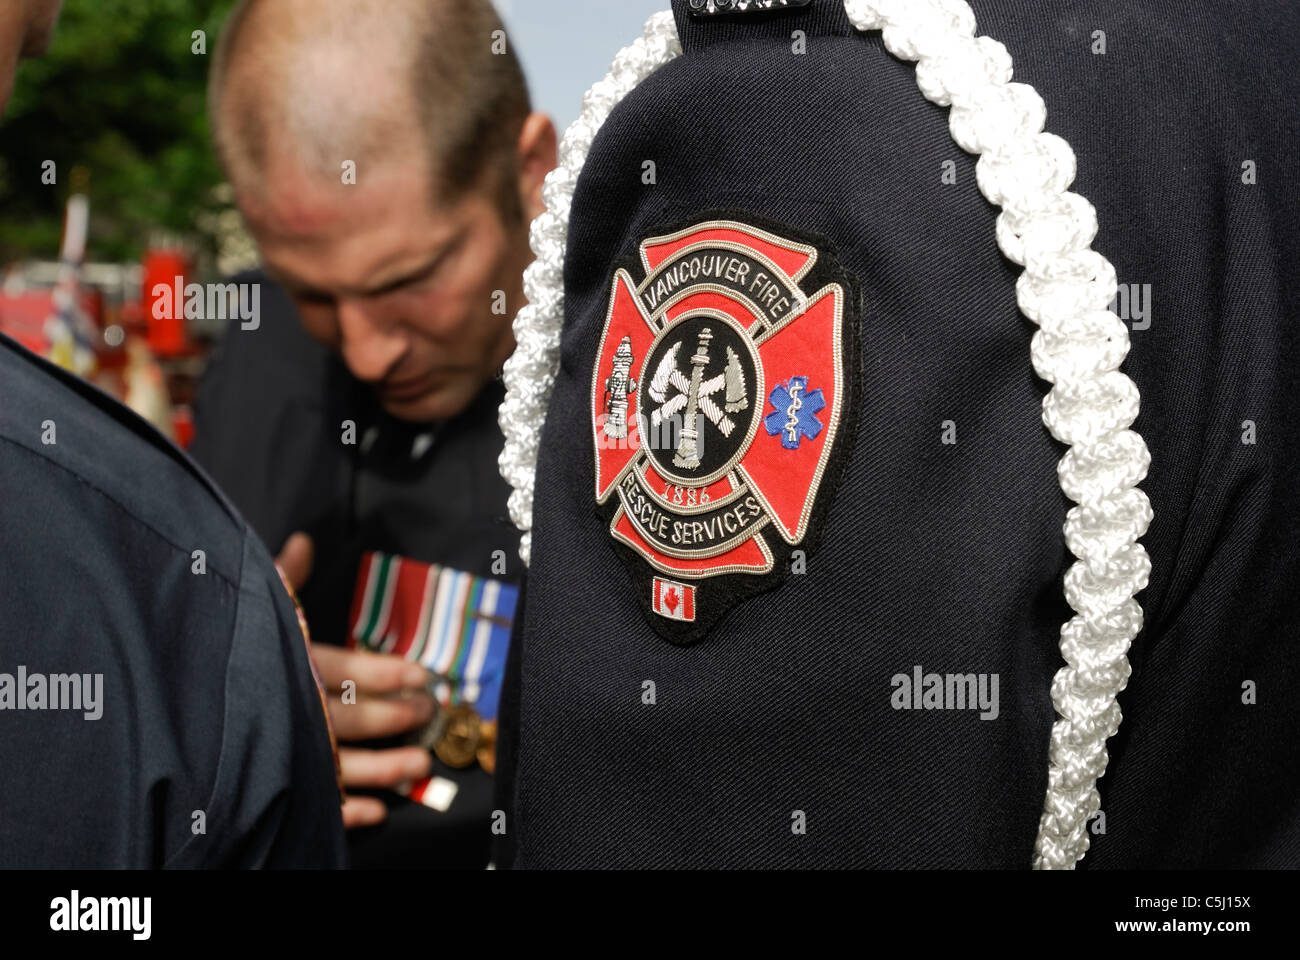 Vancouver Fireman's shoulder crest and lariat. Stock Photo